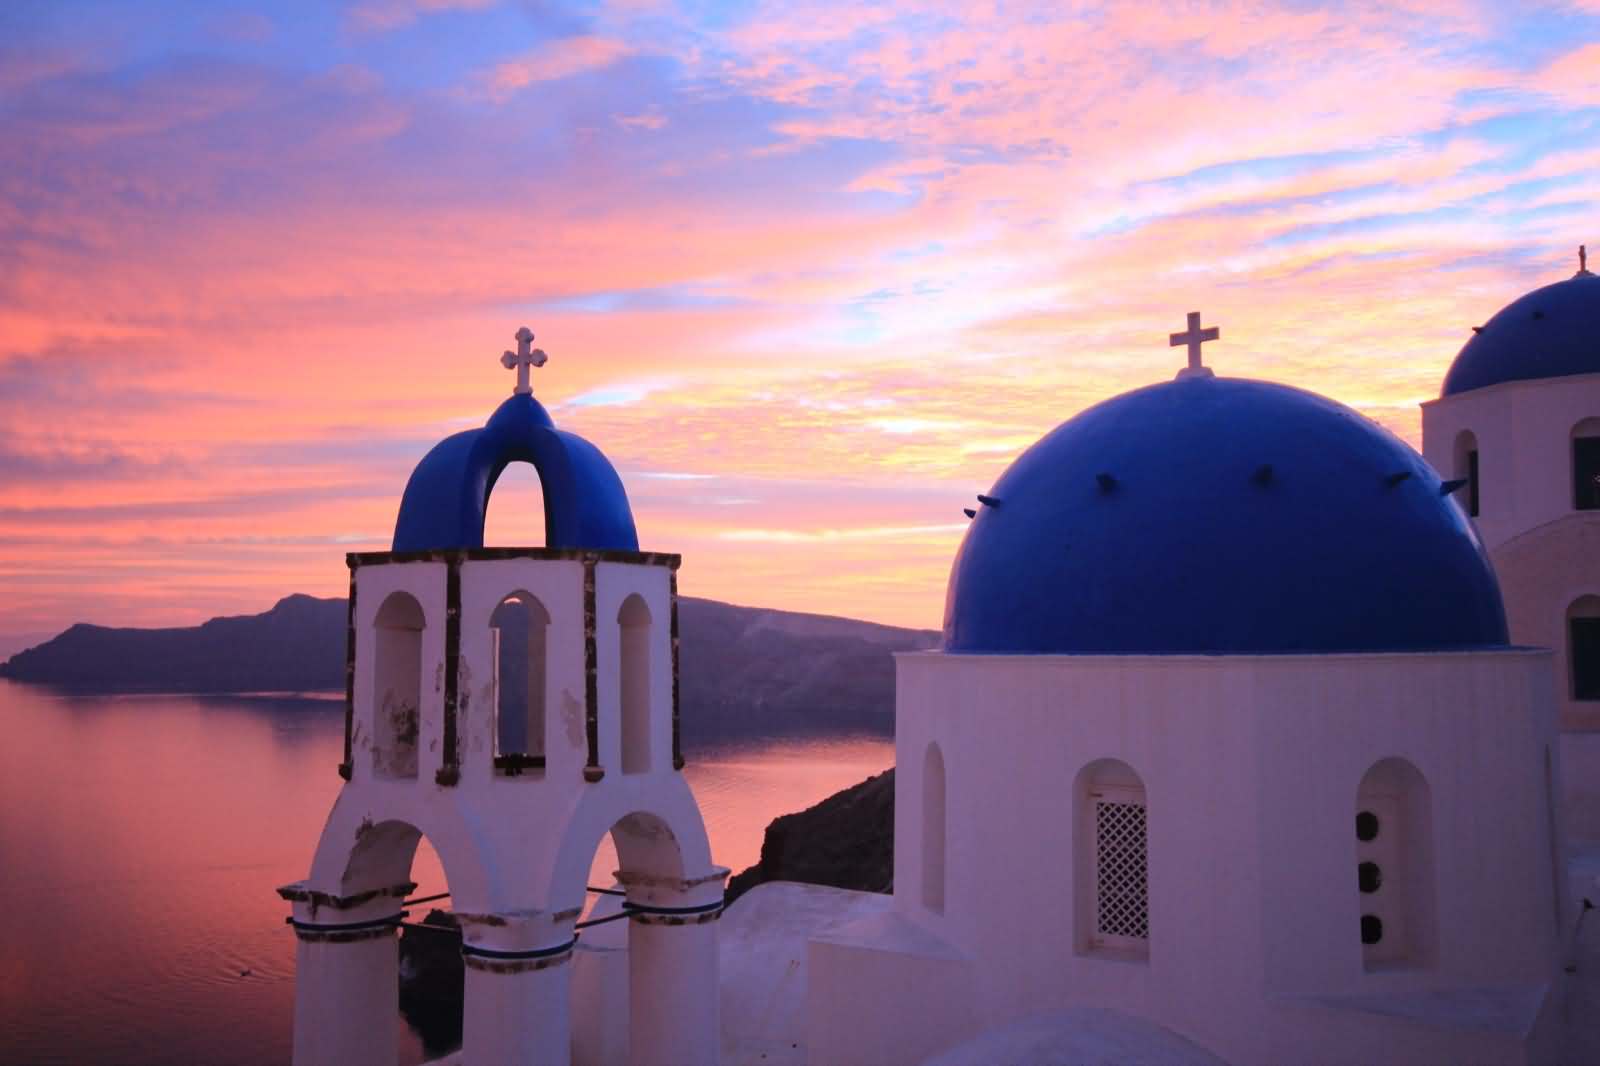 Blue Domes Of Church During Sunset In Santorini, Greece